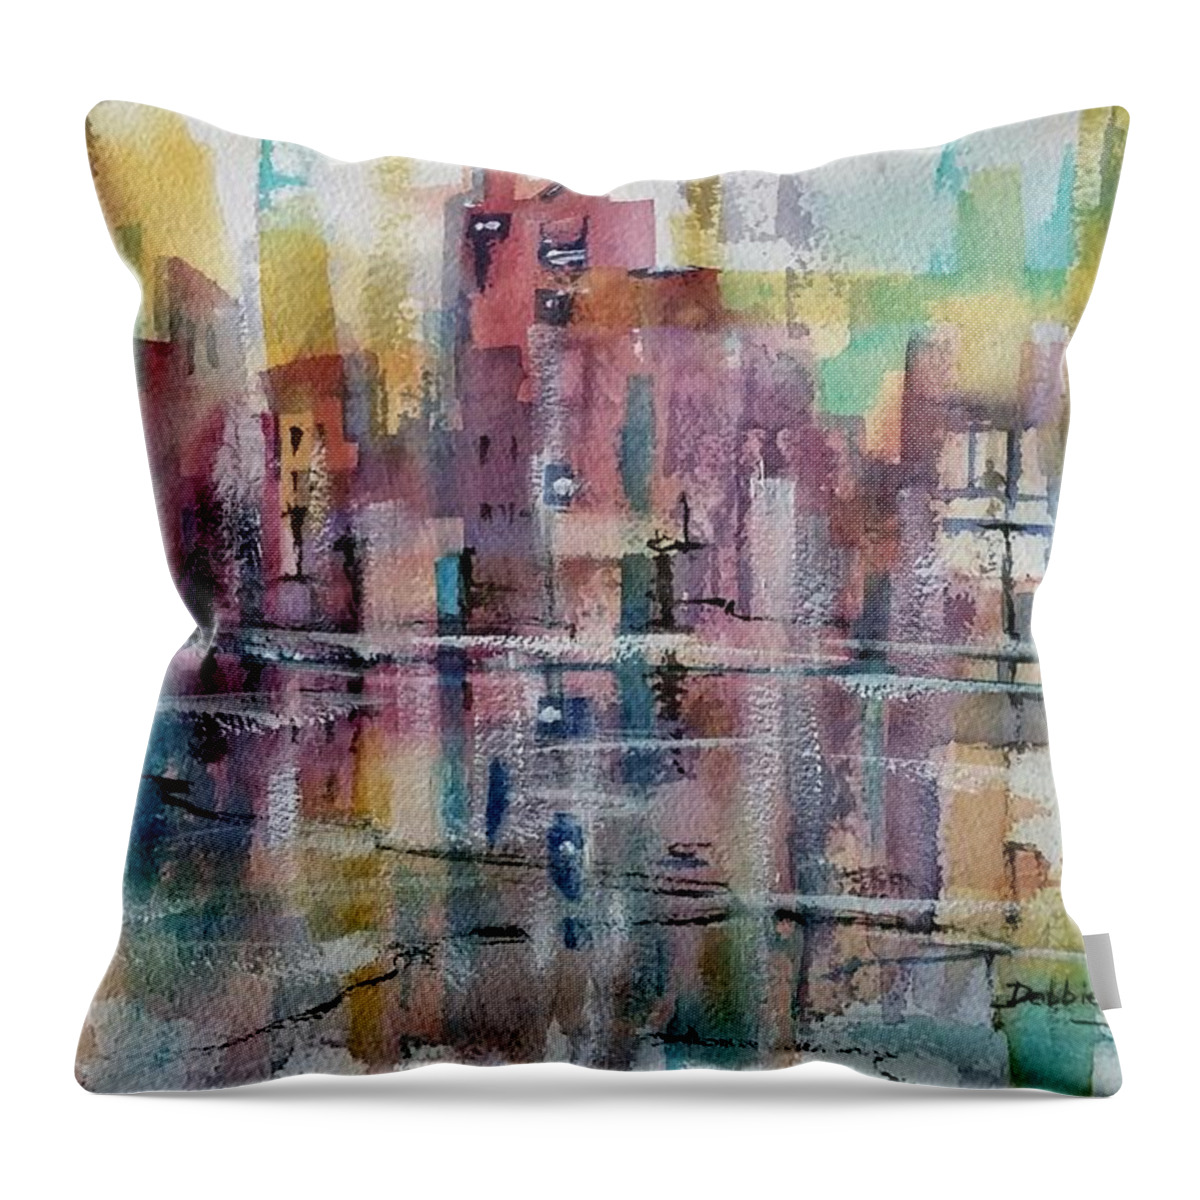 Imaginary City Throw Pillow featuring the painting City Reflections by Debbie Lewis